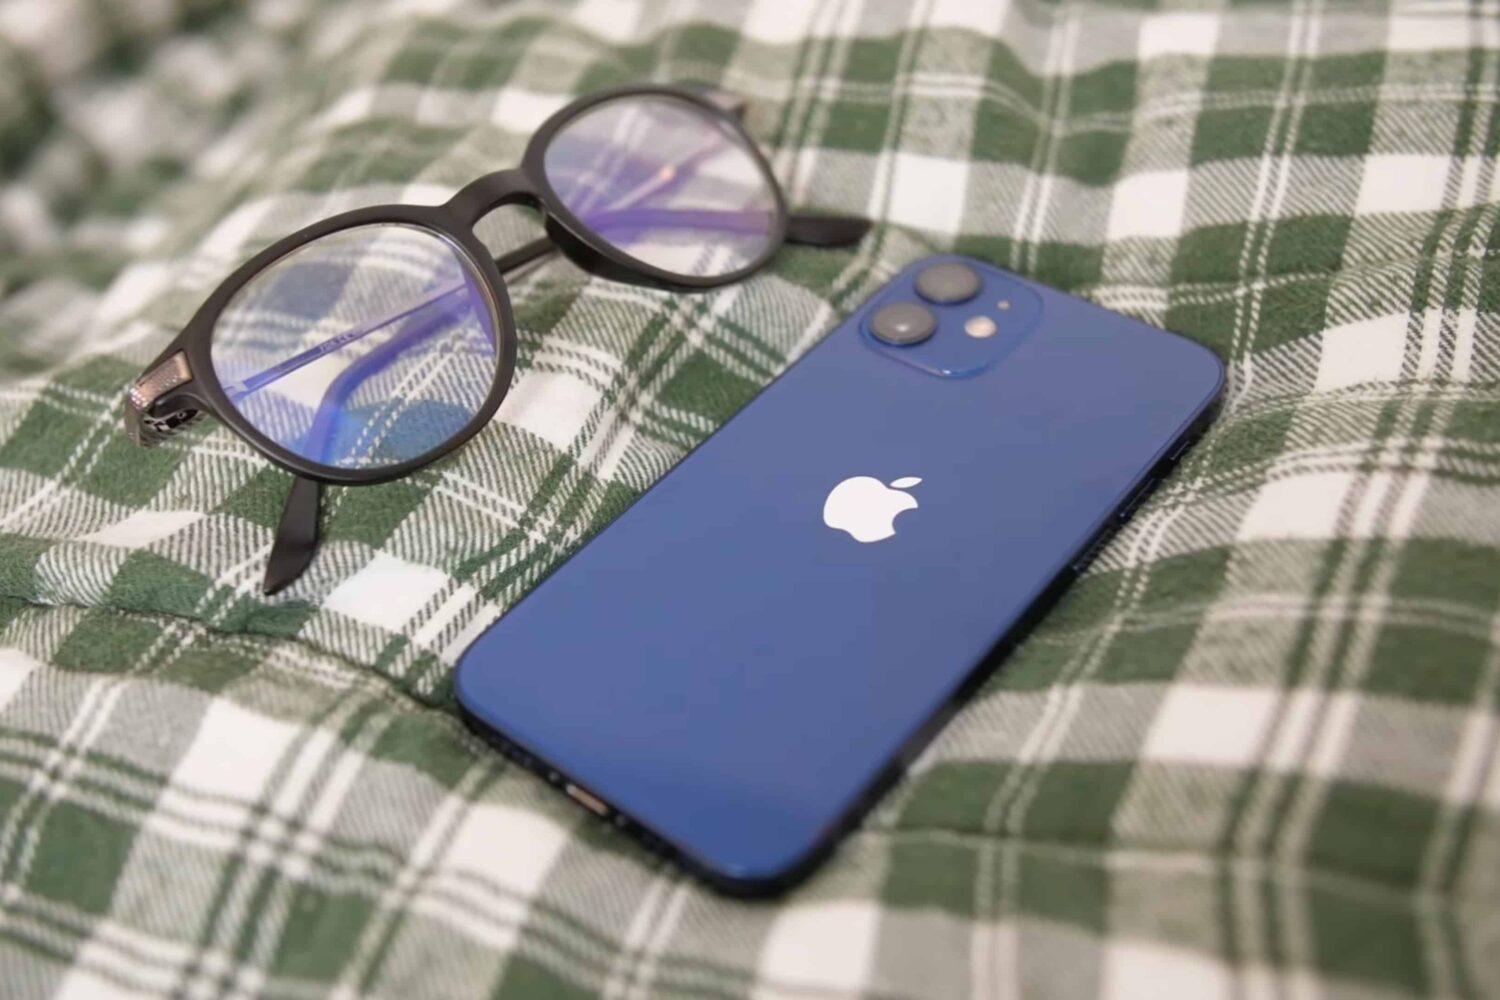 Apple's iPhone 13 laid next to glasses is being featured in this closeup photo, illustrating the ability to silence all iPhone notifications when the device is face down or covered